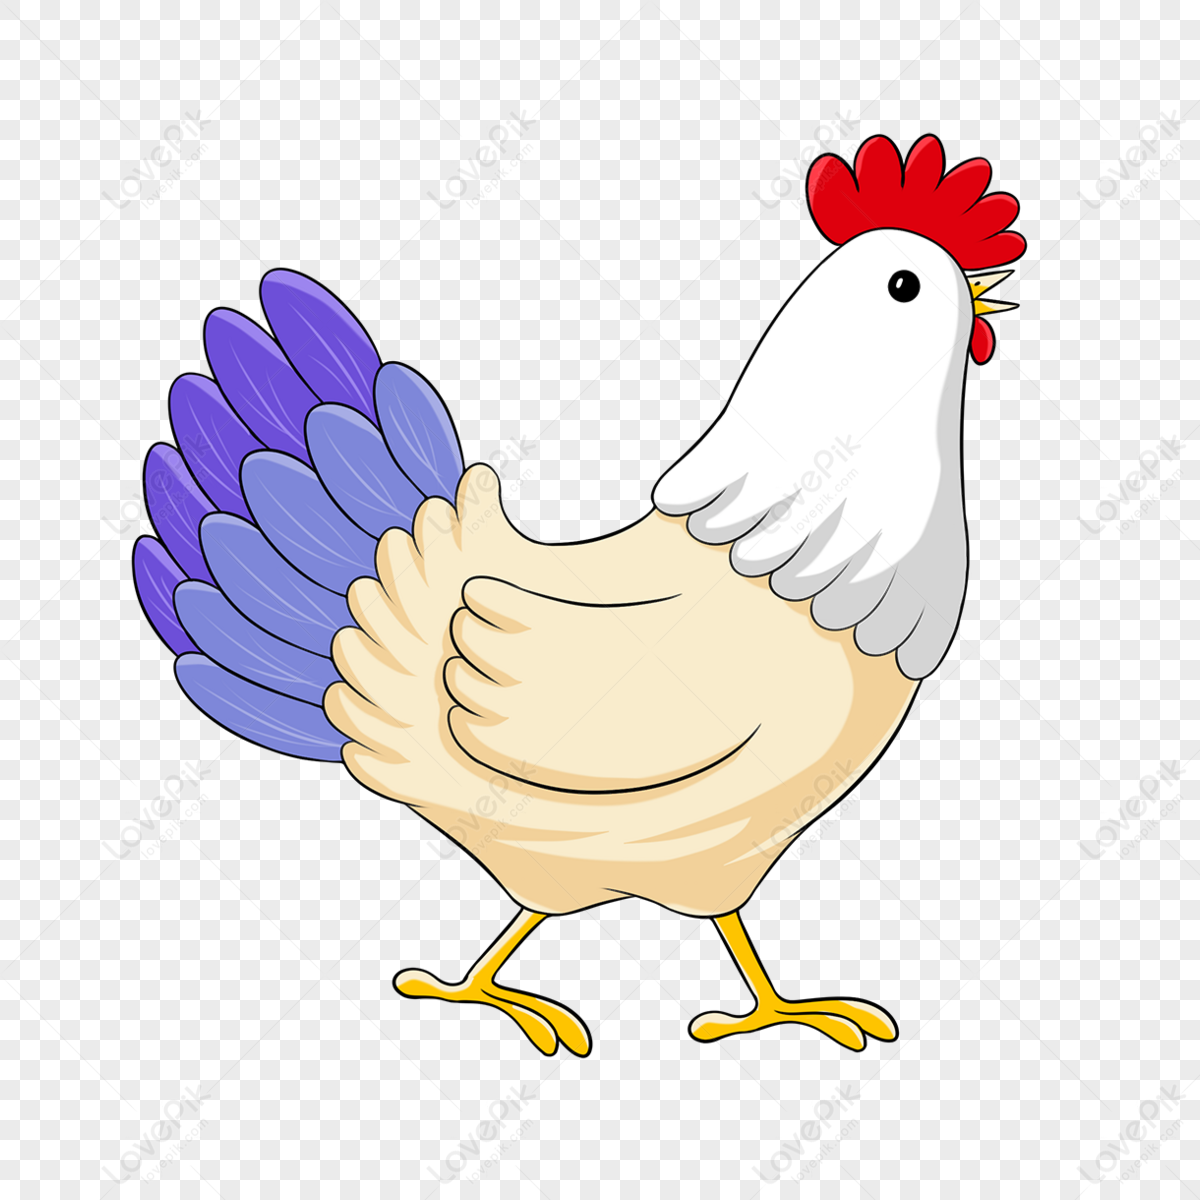 Walking Chicken Images, HD Pictures For Free Vectors Download - Lovepik.com